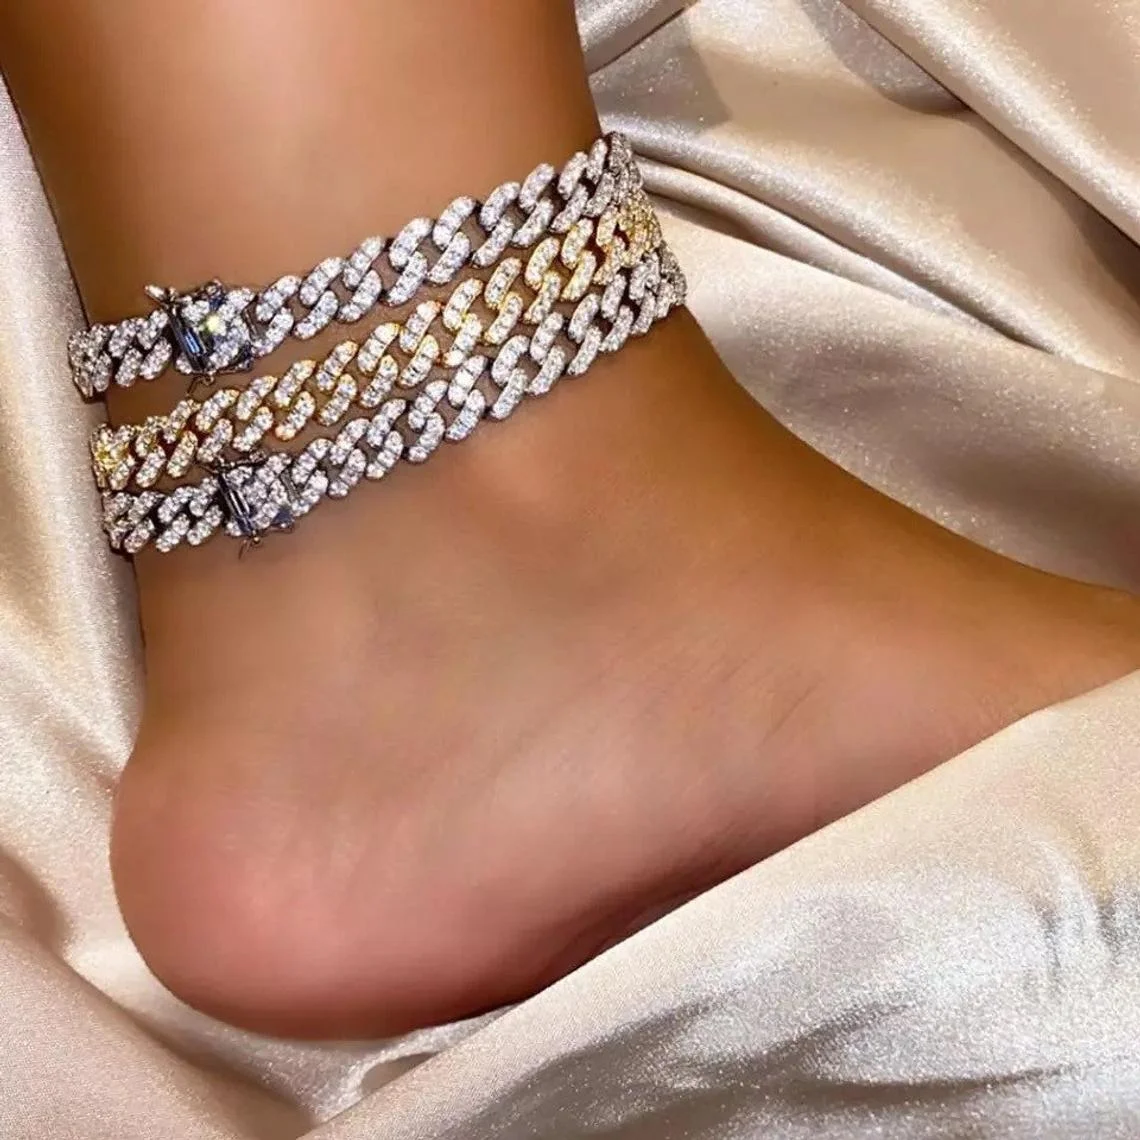 Feledorashia Anklet for Women Valentine's Day Gifts Silver Women's Summer  Beach Sandal Barefoot Chains Foot Bracelet Ankle Chain Clearance -  Walmart.com